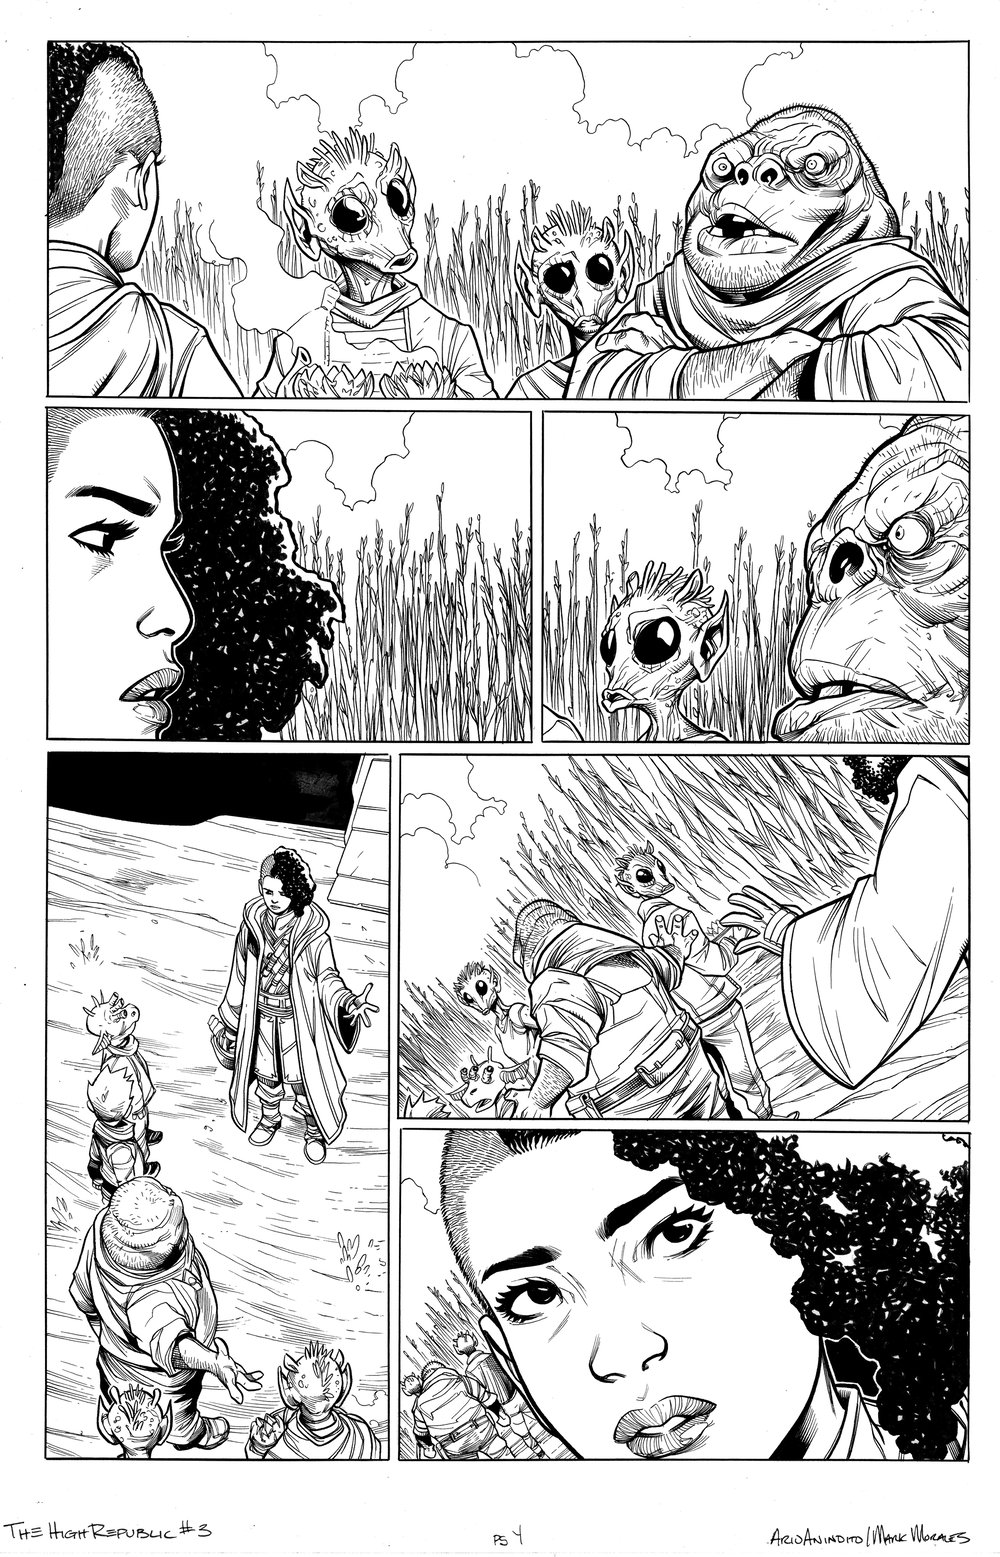 Image of Star Wars: The High Republic #3 PG 4